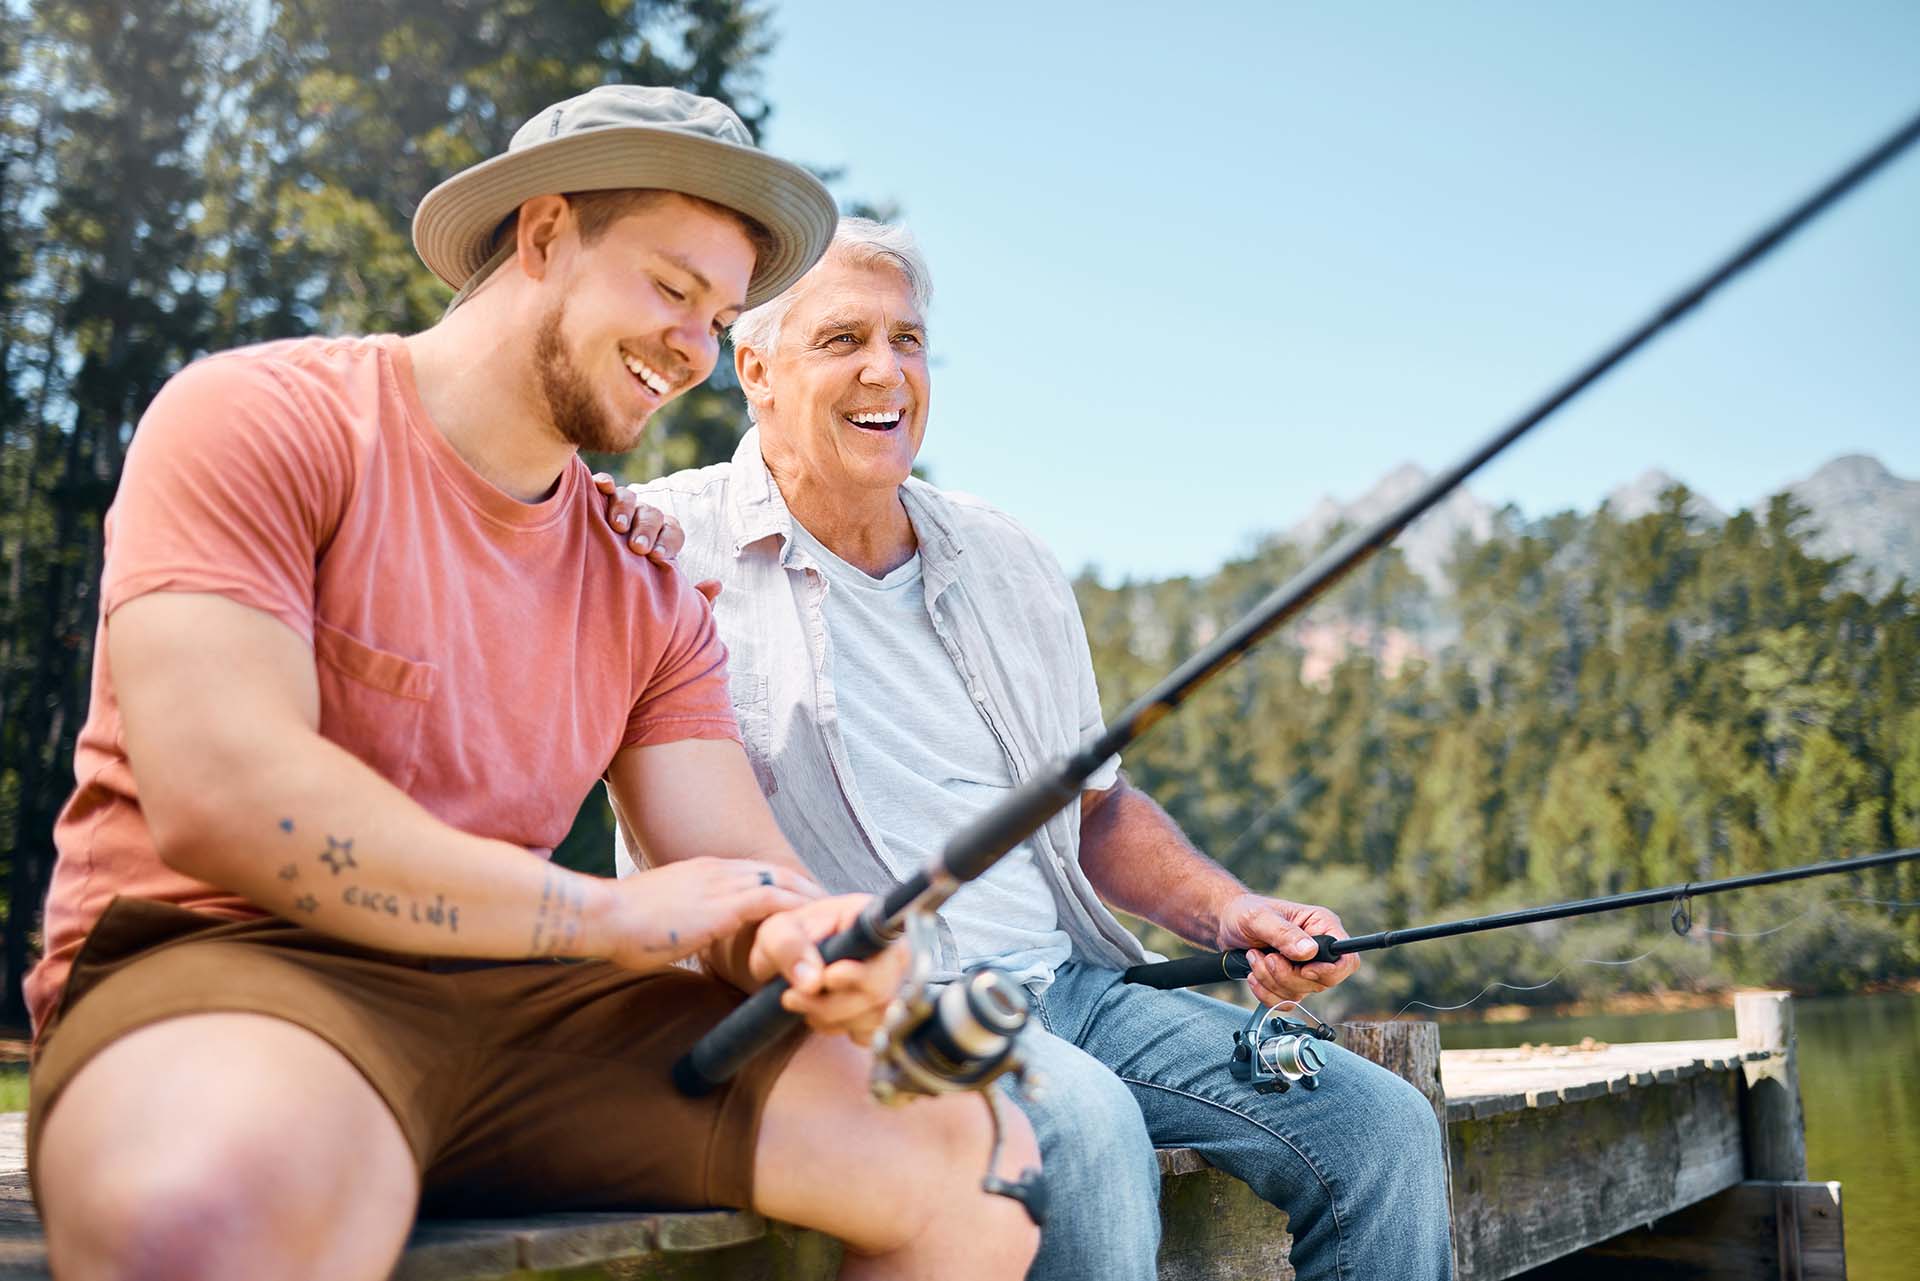 Happy man, father and fishing in lake for fun bonding, hobby or relaxing together in the nature outdoors. Elderly male person laughing with son and enjoying time to catch fish on holiday by forest.